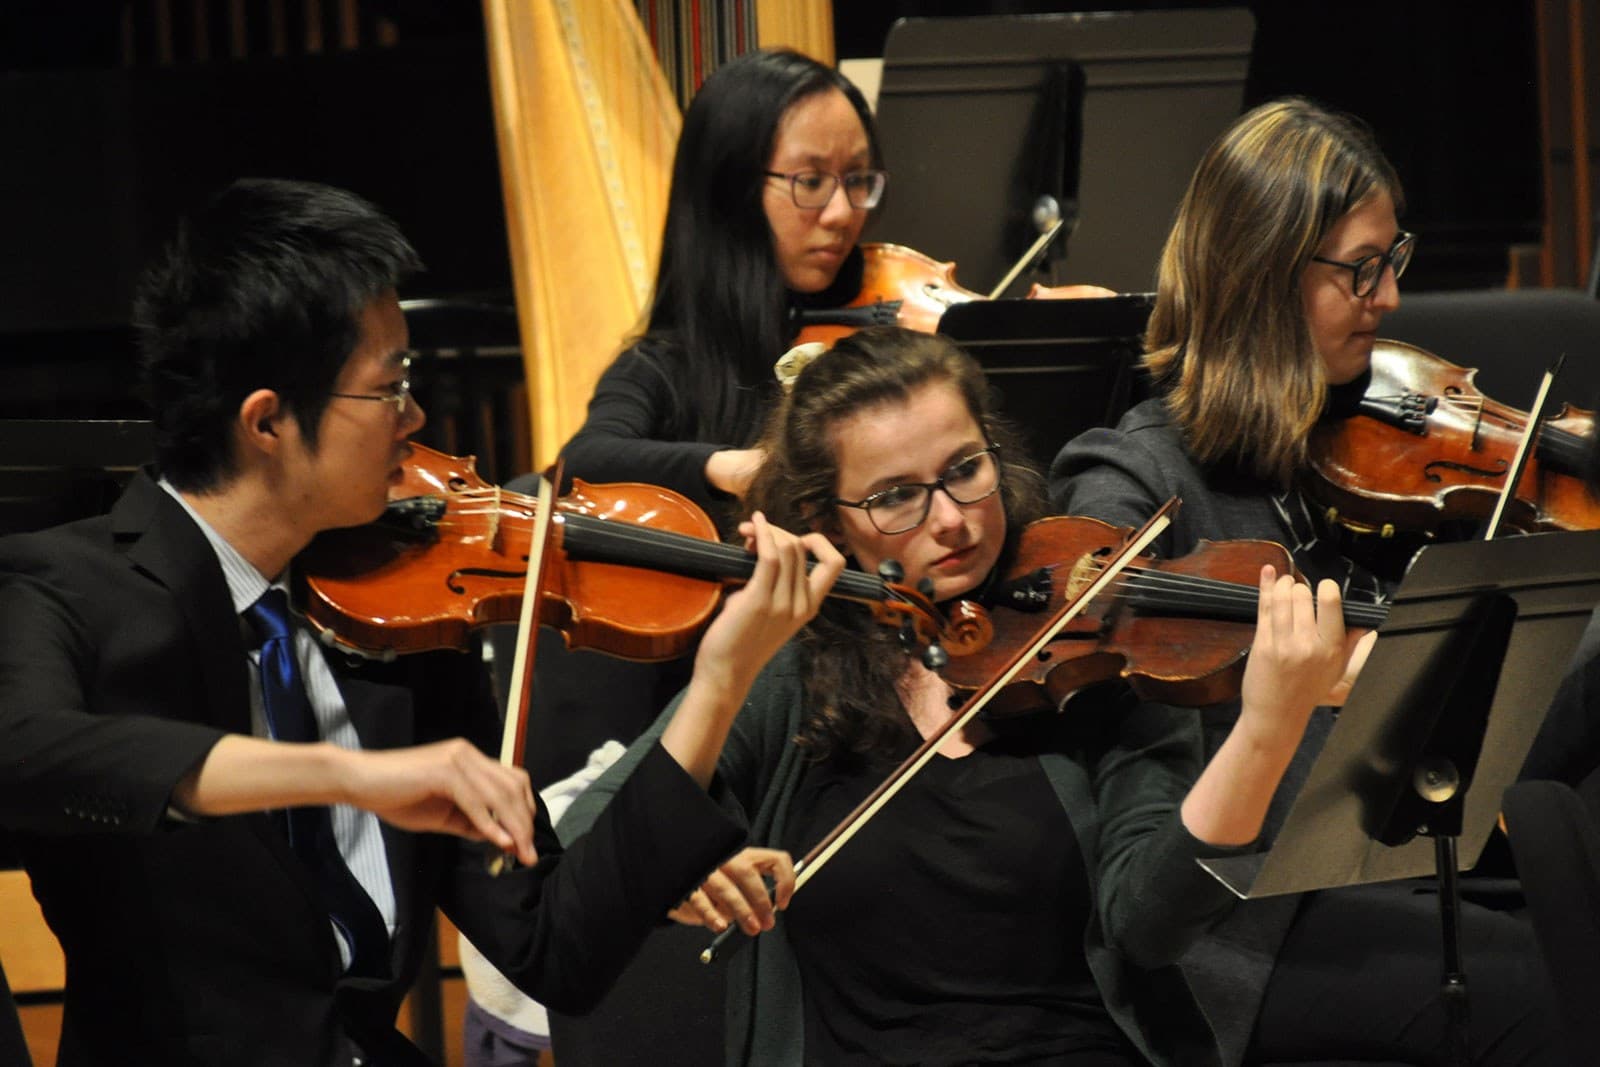 Four students play violins on stage.